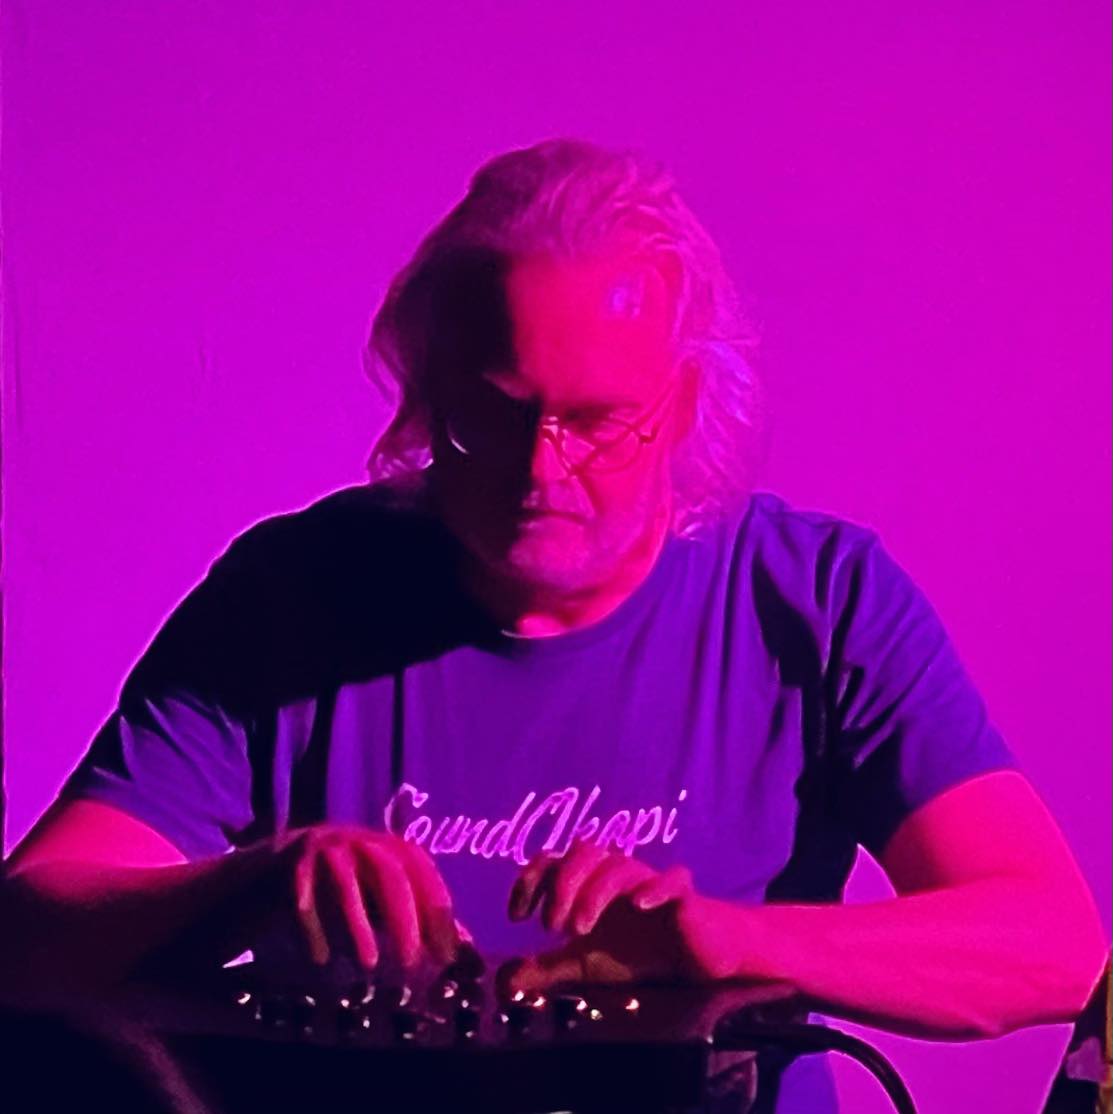 Musician playing synthesizer